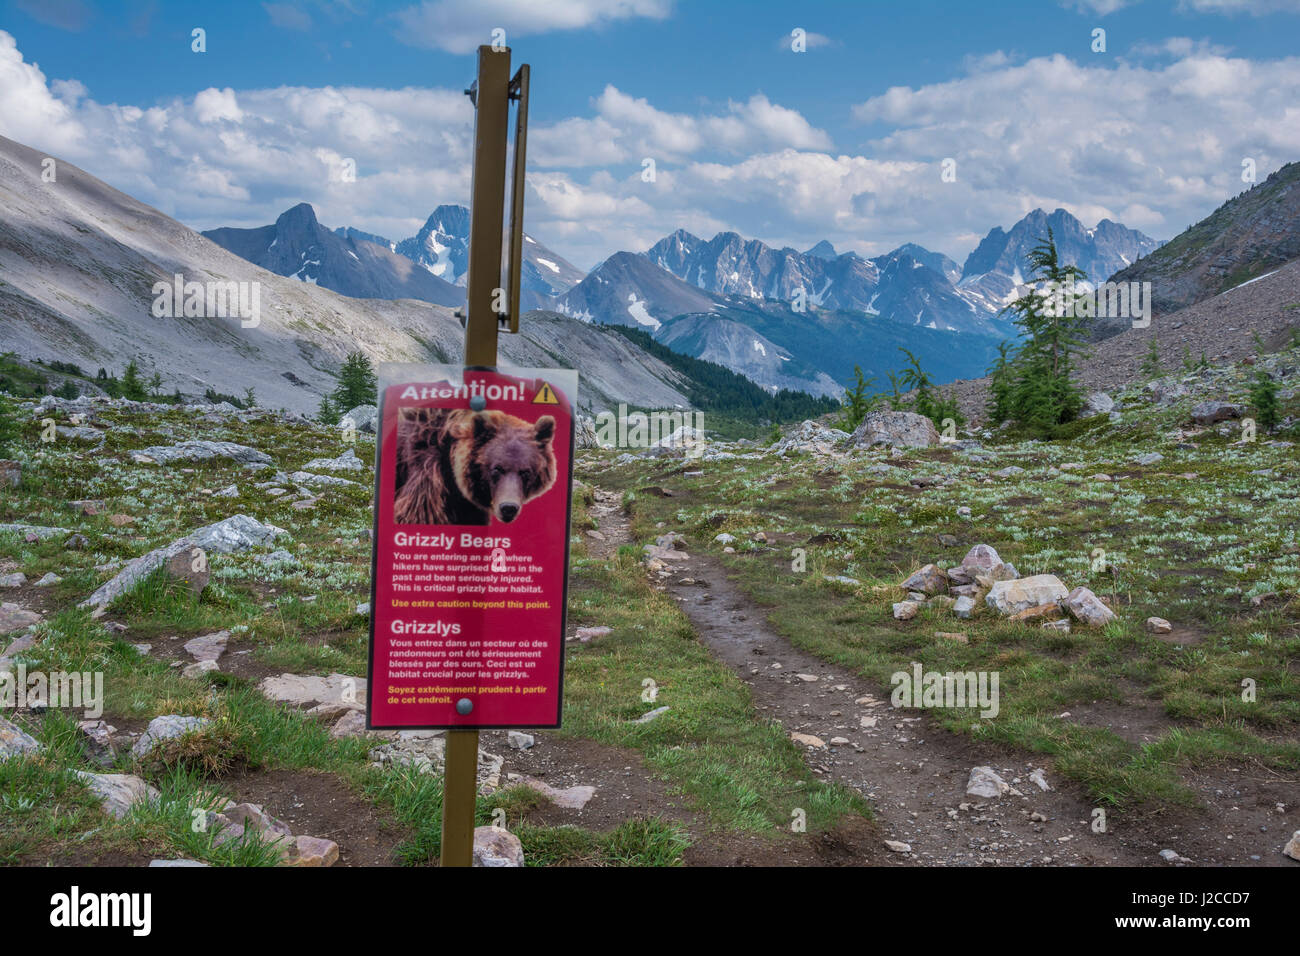 Grizzly warning sign in Assiniboine Park, Canada Stock Photo